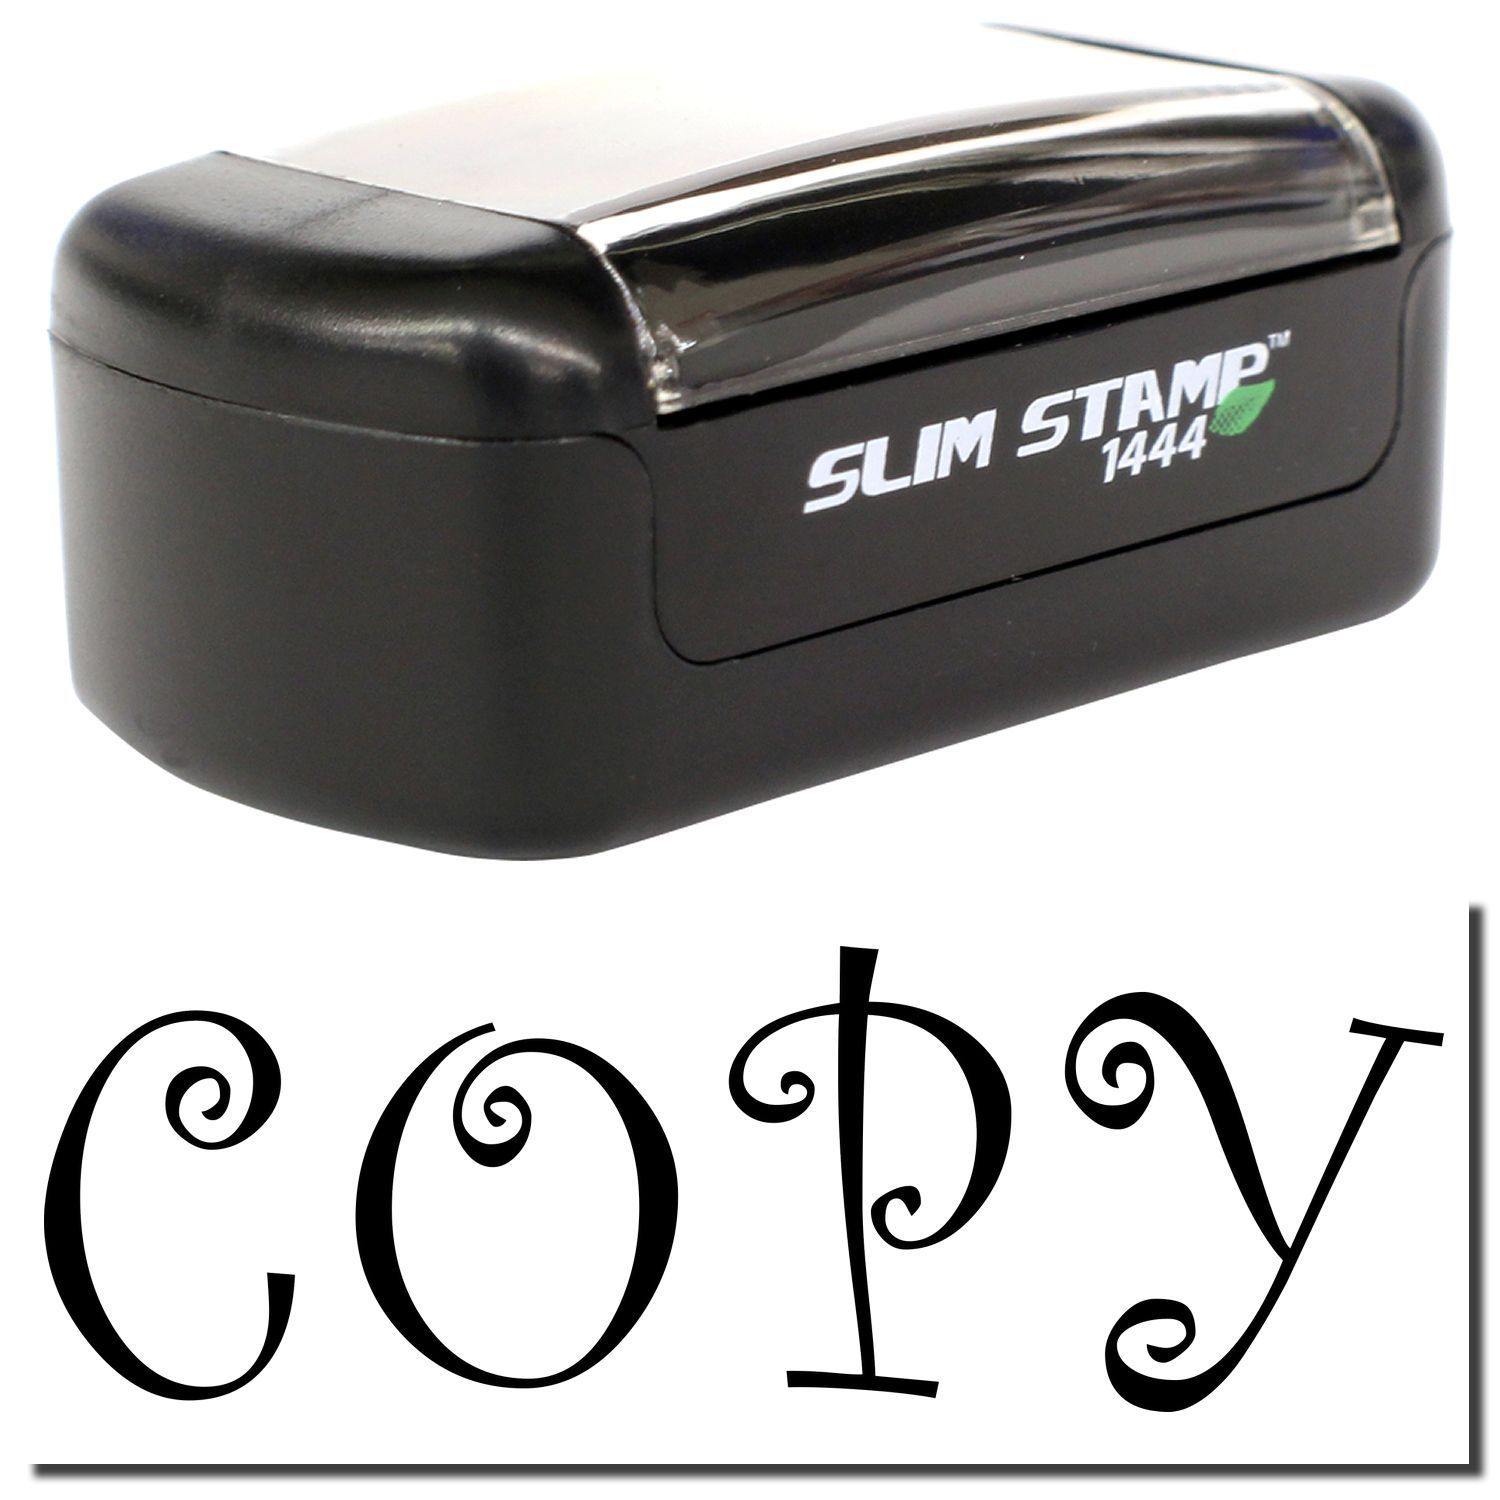 A stock office pre-inked stamp with a stamped image showing how the text "COPY" in a curly font is displayed after stamping.